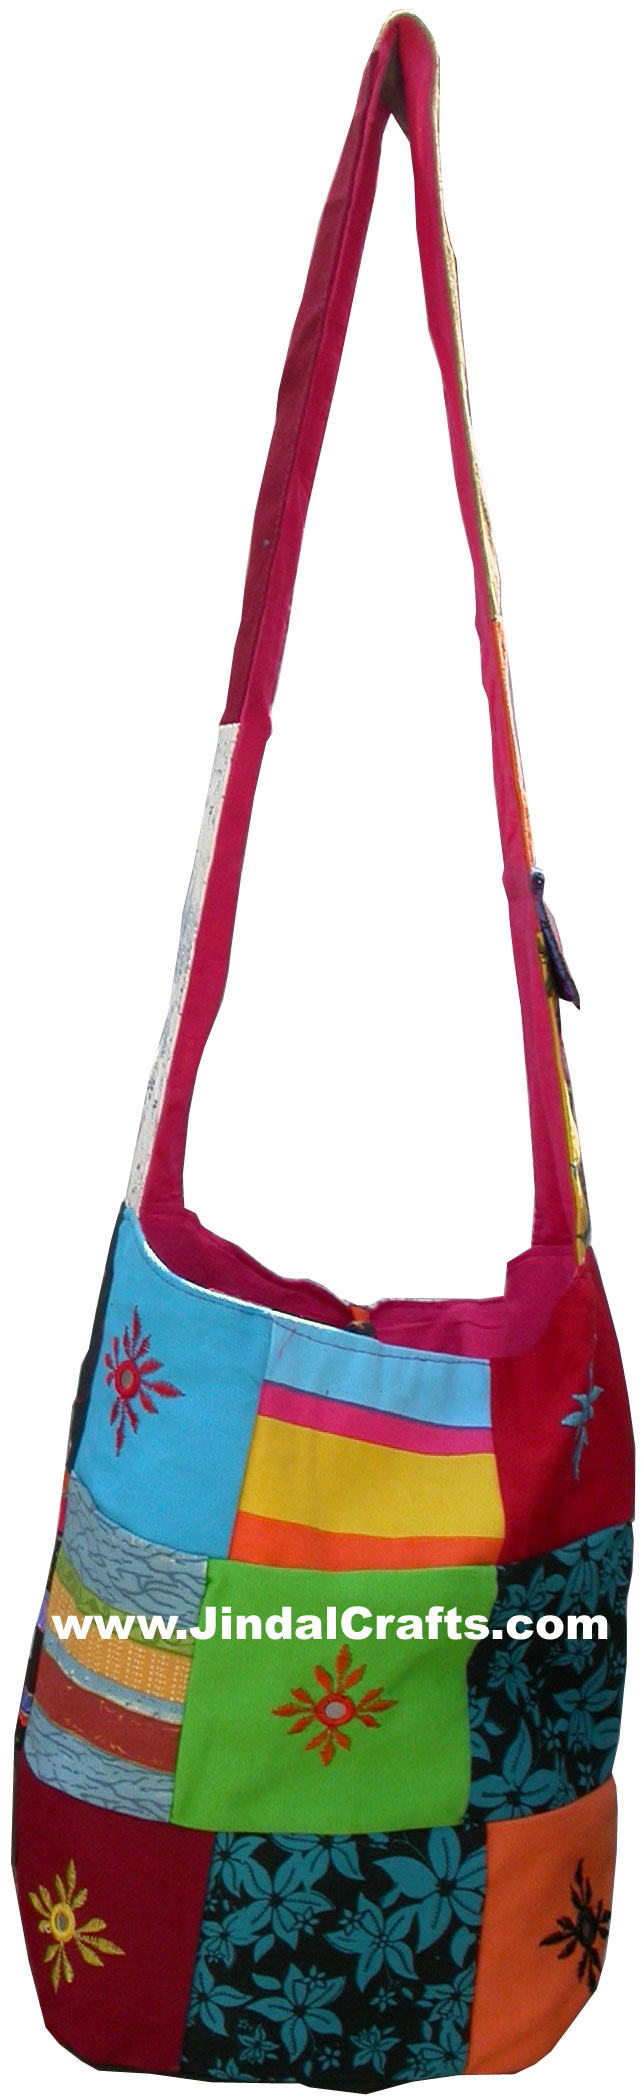 Colourful Hand Embroidered Beach Handbag from India 100 % Cotton Fabric Art